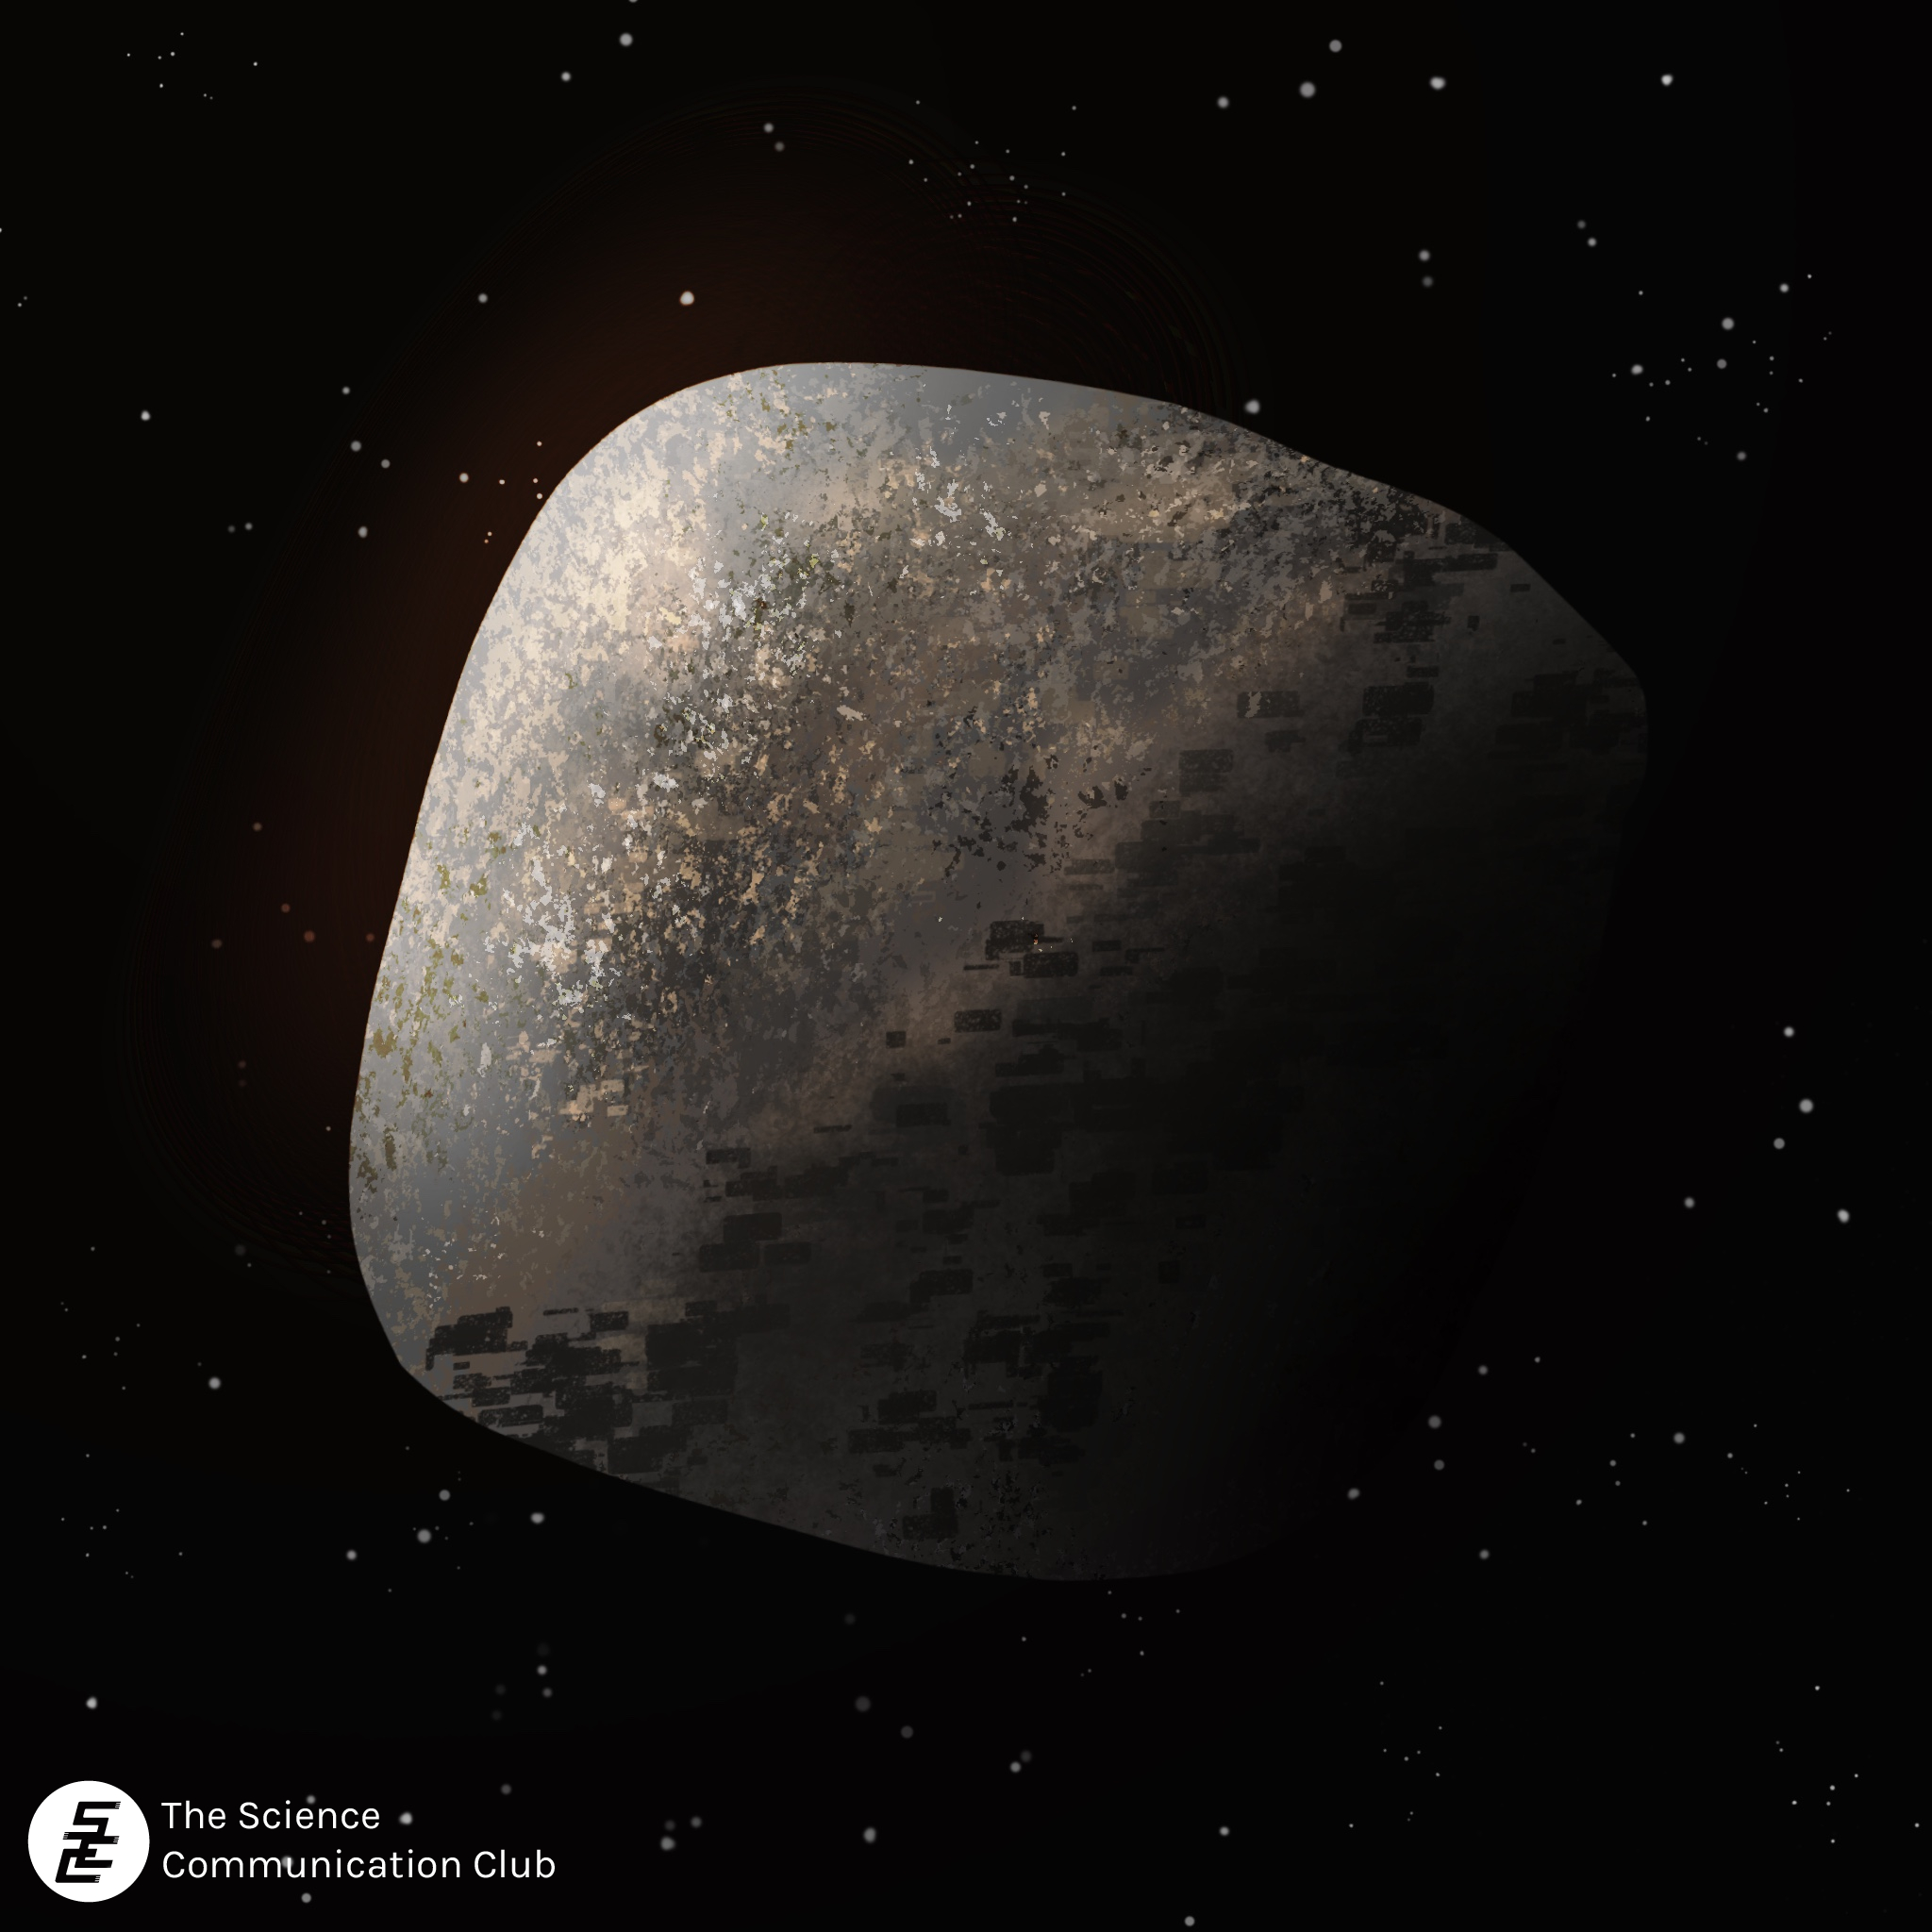 Image depicts asteroid Bennu against starry black sky